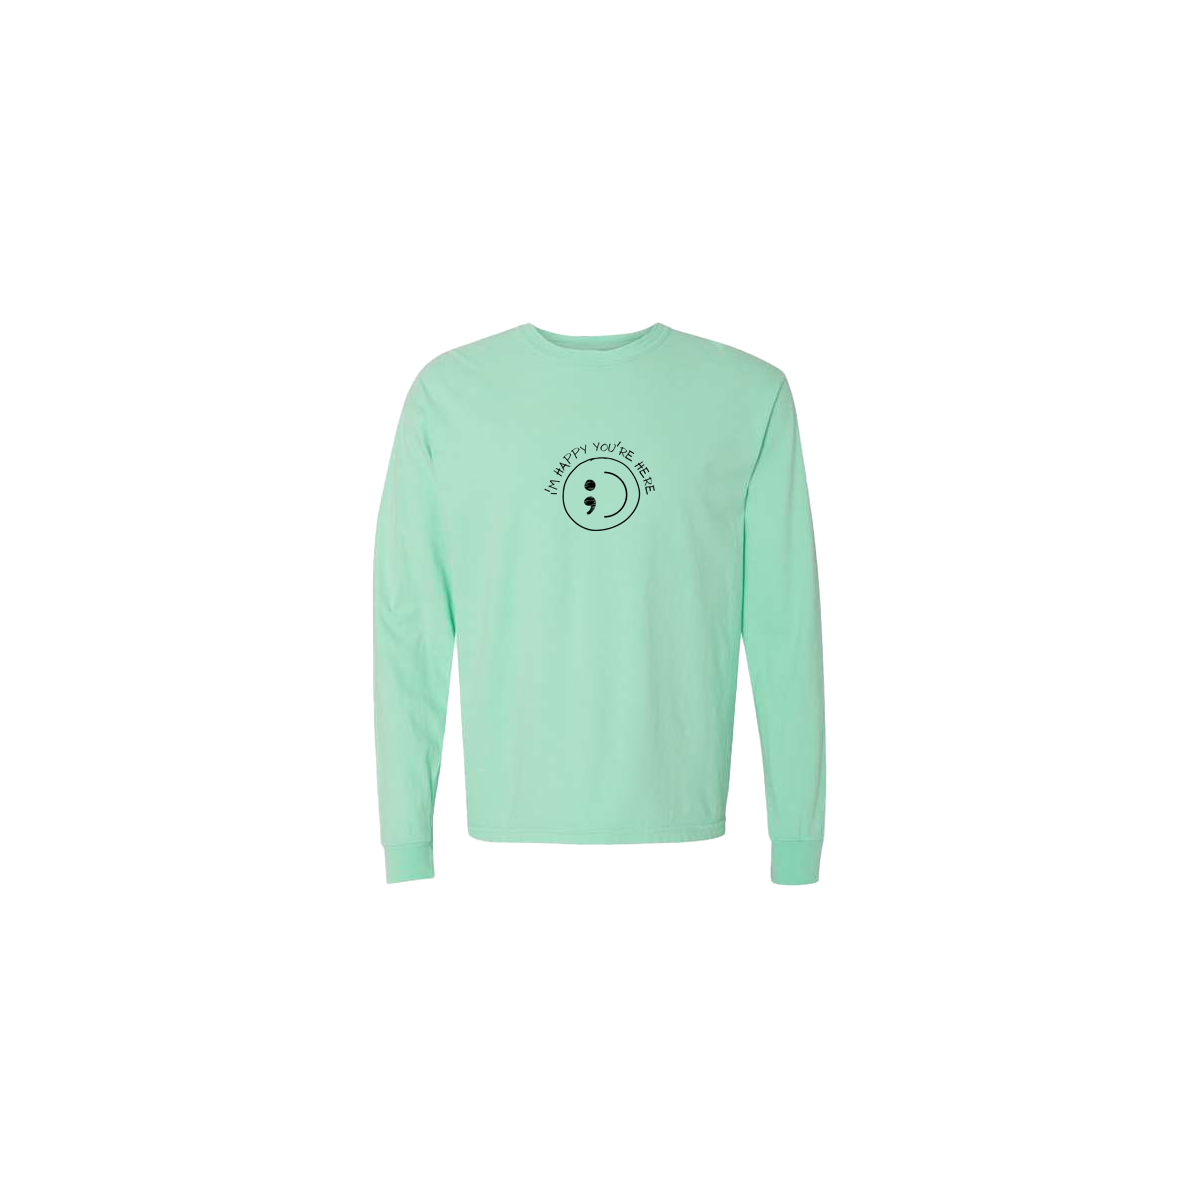 I'm Happy You're Here Embroidered Mint Long Sleeve Tshirt - Mental Health Awareness Clothing